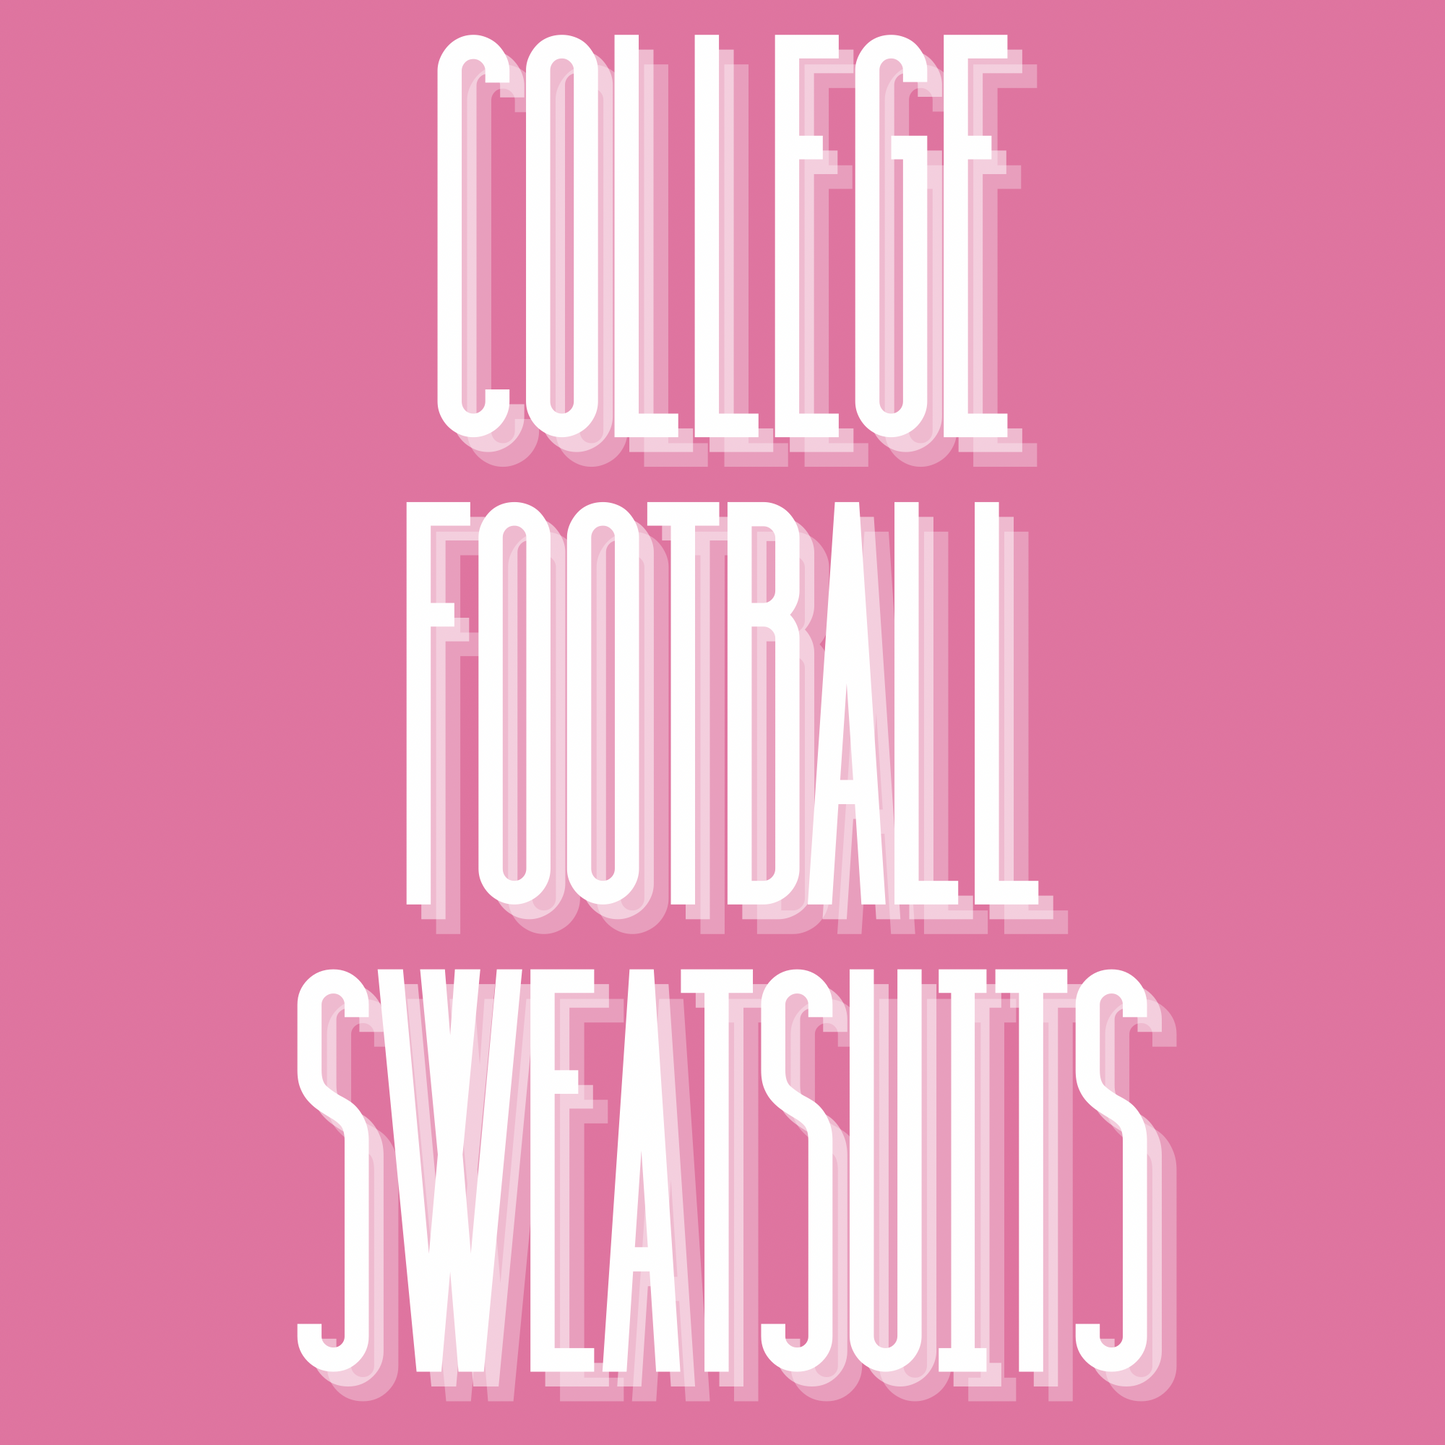 Football Sweatsuits (COLLEGE) - TODDLER/YOUTH WS